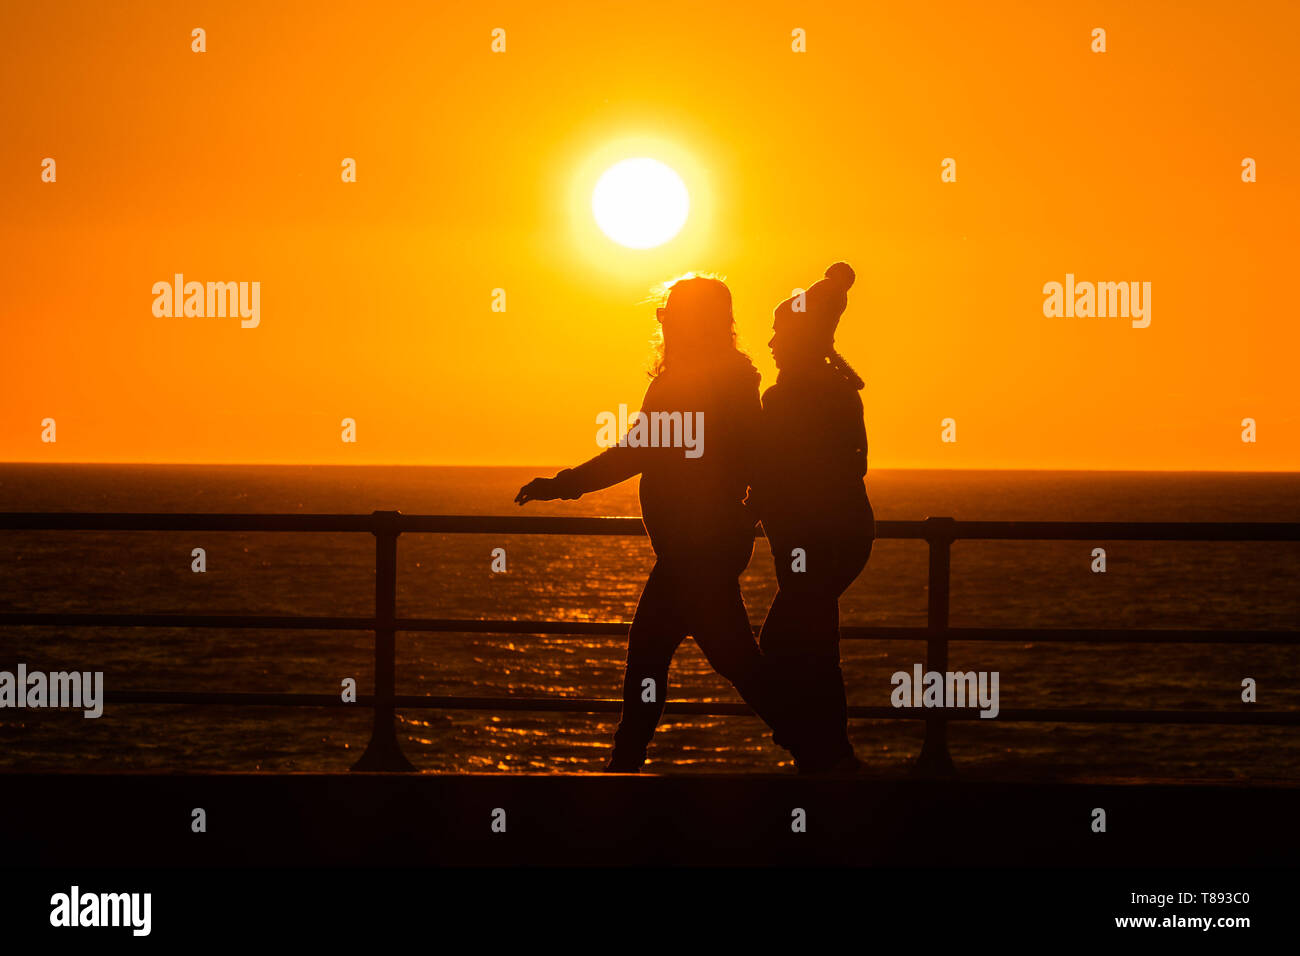 Aberystwyth Wales UK, Saturday 11 May 2019  UK Weather: People are silhouetted  against the glorious setting sun as they XXXXXX in Aberystwyth on the Cardigan Bay coast, West Wales. The weather is set to get warmer again in the coming week after as period of unsettled cold conditions.   photo credit Keith Morris / Alamy Live News Stock Photo